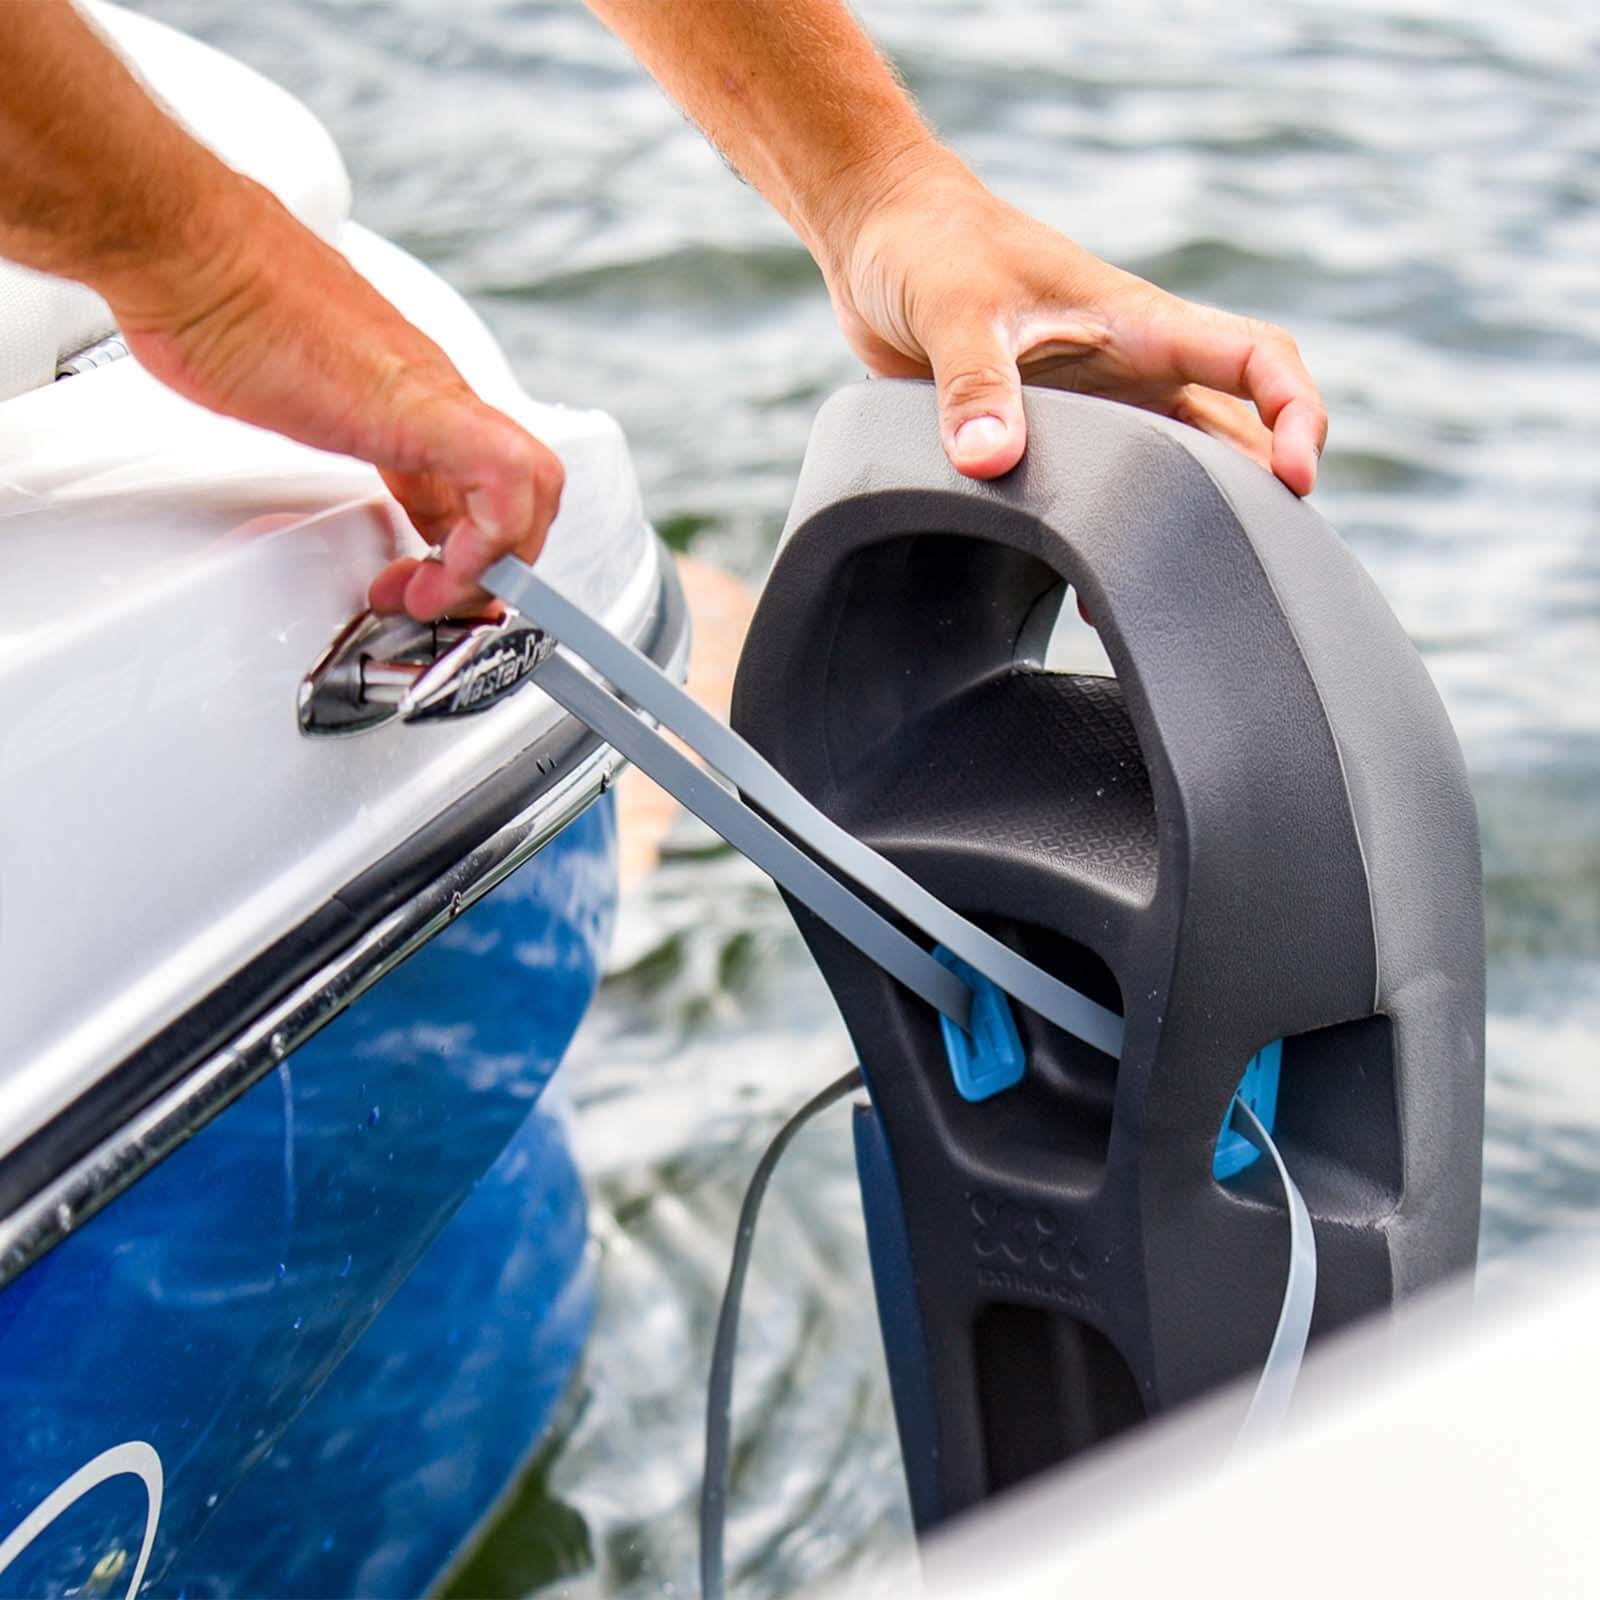 A person is putting a MISSION Sentry Boat Fender on the side of a boat for protection using Boat fenders.